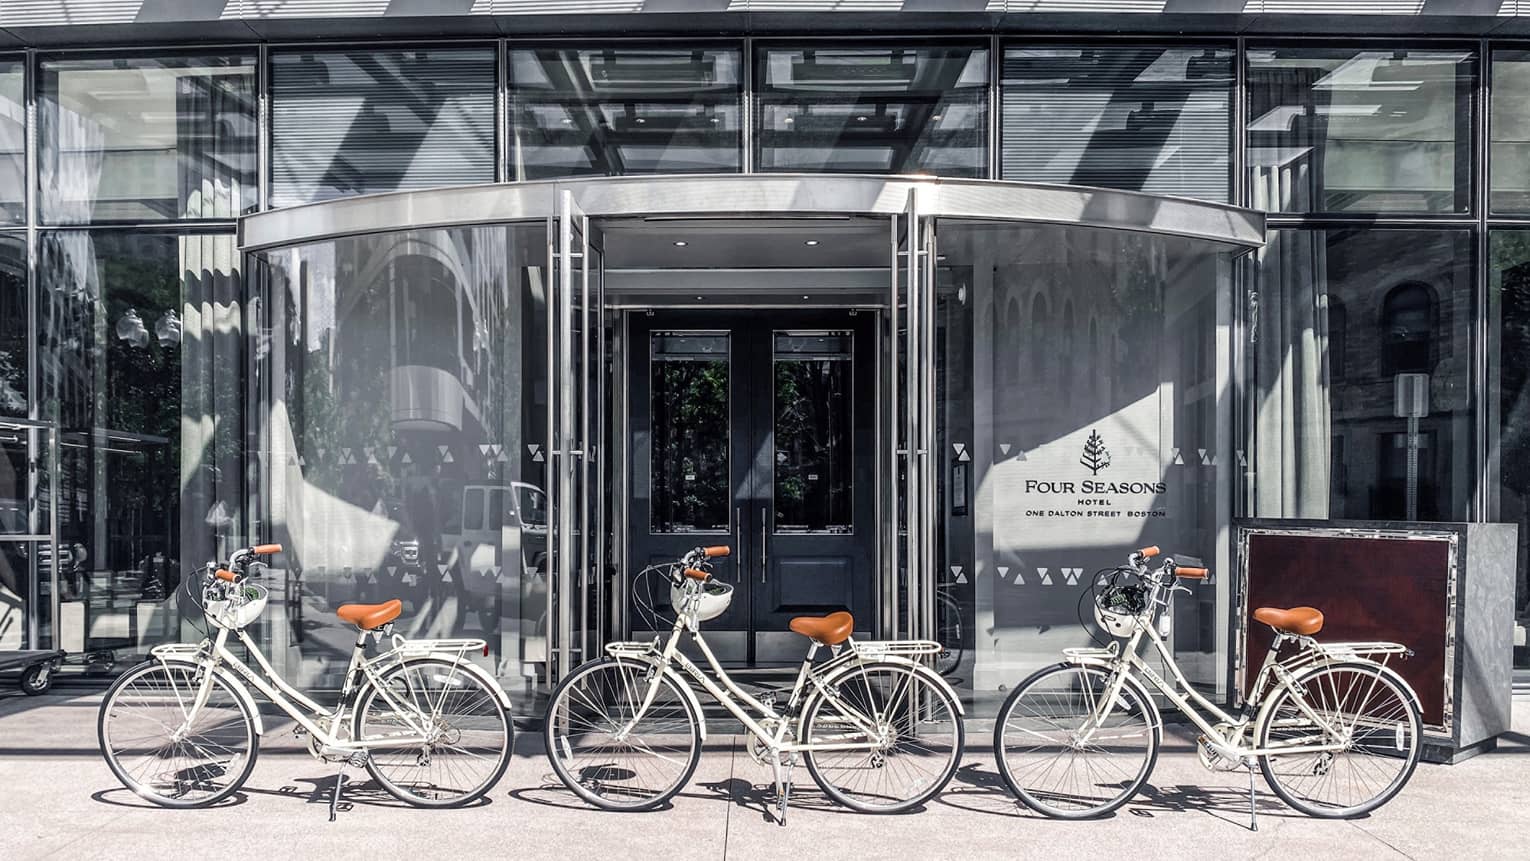 The bicycles in front of a four seasons hotel entrance.